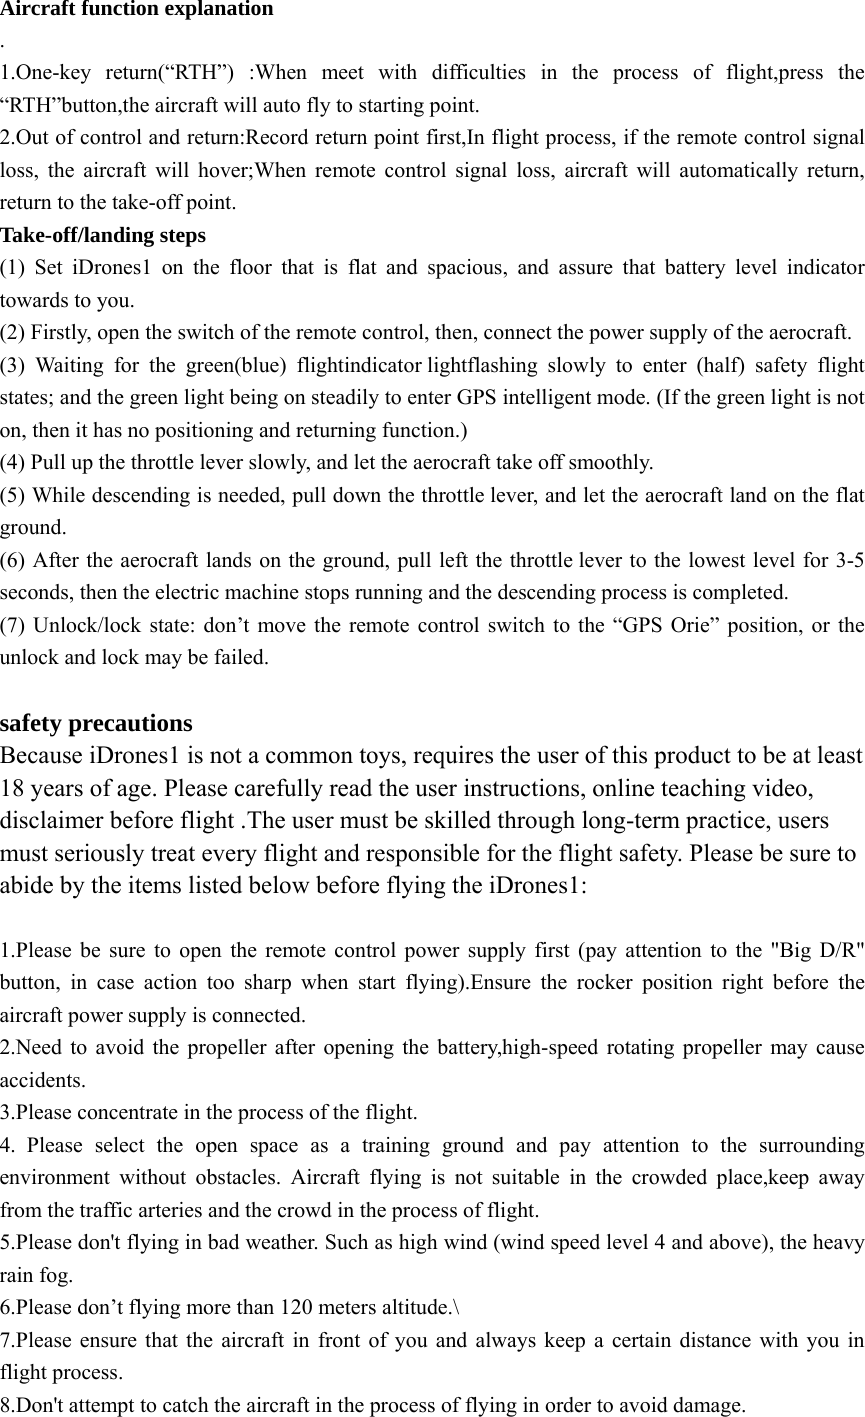 Aircraft function explanation . 1.One-key return(“RTH”) :When meet with difficulties in the process of flight,press the “RTH”button,the aircraft will auto fly to starting point. 2.Out of control and return:Record return point first,In flight process, if the remote control signal loss, the aircraft will hover;When remote control signal loss, aircraft will automatically return, return to the take-off point.      Take-off/landing steps (1) Set iDrones1 on the floor that is flat and spacious, and assure that battery level indicator towards to you. (2) Firstly, open the switch of the remote control, then, connect the power supply of the aerocraft. (3) Waiting for the green(blue) flightindicator lightflashing slowly to enter (half) safety flight states; and the green light being on steadily to enter GPS intelligent mode. (If the green light is not on, then it has no positioning and returning function.) (4) Pull up the throttle lever slowly, and let the aerocraft take off smoothly. (5) While descending is needed, pull down the throttle lever, and let the aerocraft land on the flat ground. (6) After the aerocraft lands on the ground, pull left the throttle lever to the lowest level for 3-5 seconds, then the electric machine stops running and the descending process is completed. (7) Unlock/lock state: don’t move the remote control switch to the “GPS Orie” position, or the unlock and lock may be failed.  safety precautions Because iDrones1 is not a common toys, requires the user of this product to be at least 18 years of age. Please carefully read the user instructions, online teaching video, disclaimer before flight .The user must be skilled through long-term practice, users must seriously treat every flight and responsible for the flight safety. Please be sure to abide by the items listed below before flying the iDrones1:  1.Please be sure to open the remote control power supply first (pay attention to the &quot;Big D/R&quot; button, in case action too sharp when start flying).Ensure the rocker position right before the aircraft power supply is connected. 2.Need to avoid the propeller after opening the battery,high-speed rotating propeller may cause accidents. 3.Please concentrate in the process of the flight. 4. Please select the open space as a training ground and pay attention to the surrounding environment without obstacles. Aircraft flying is not suitable in the crowded place,keep away from the traffic arteries and the crowd in the process of flight.   5.Please don&apos;t flying in bad weather. Such as high wind (wind speed level 4 and above), the heavy rain fog. 6.Please don’t flying more than 120 meters altitude.\ 7.Please ensure that the aircraft in front of you and always keep a certain distance with you in flight process.   8.Don&apos;t attempt to catch the aircraft in the process of flying in order to avoid damage. 